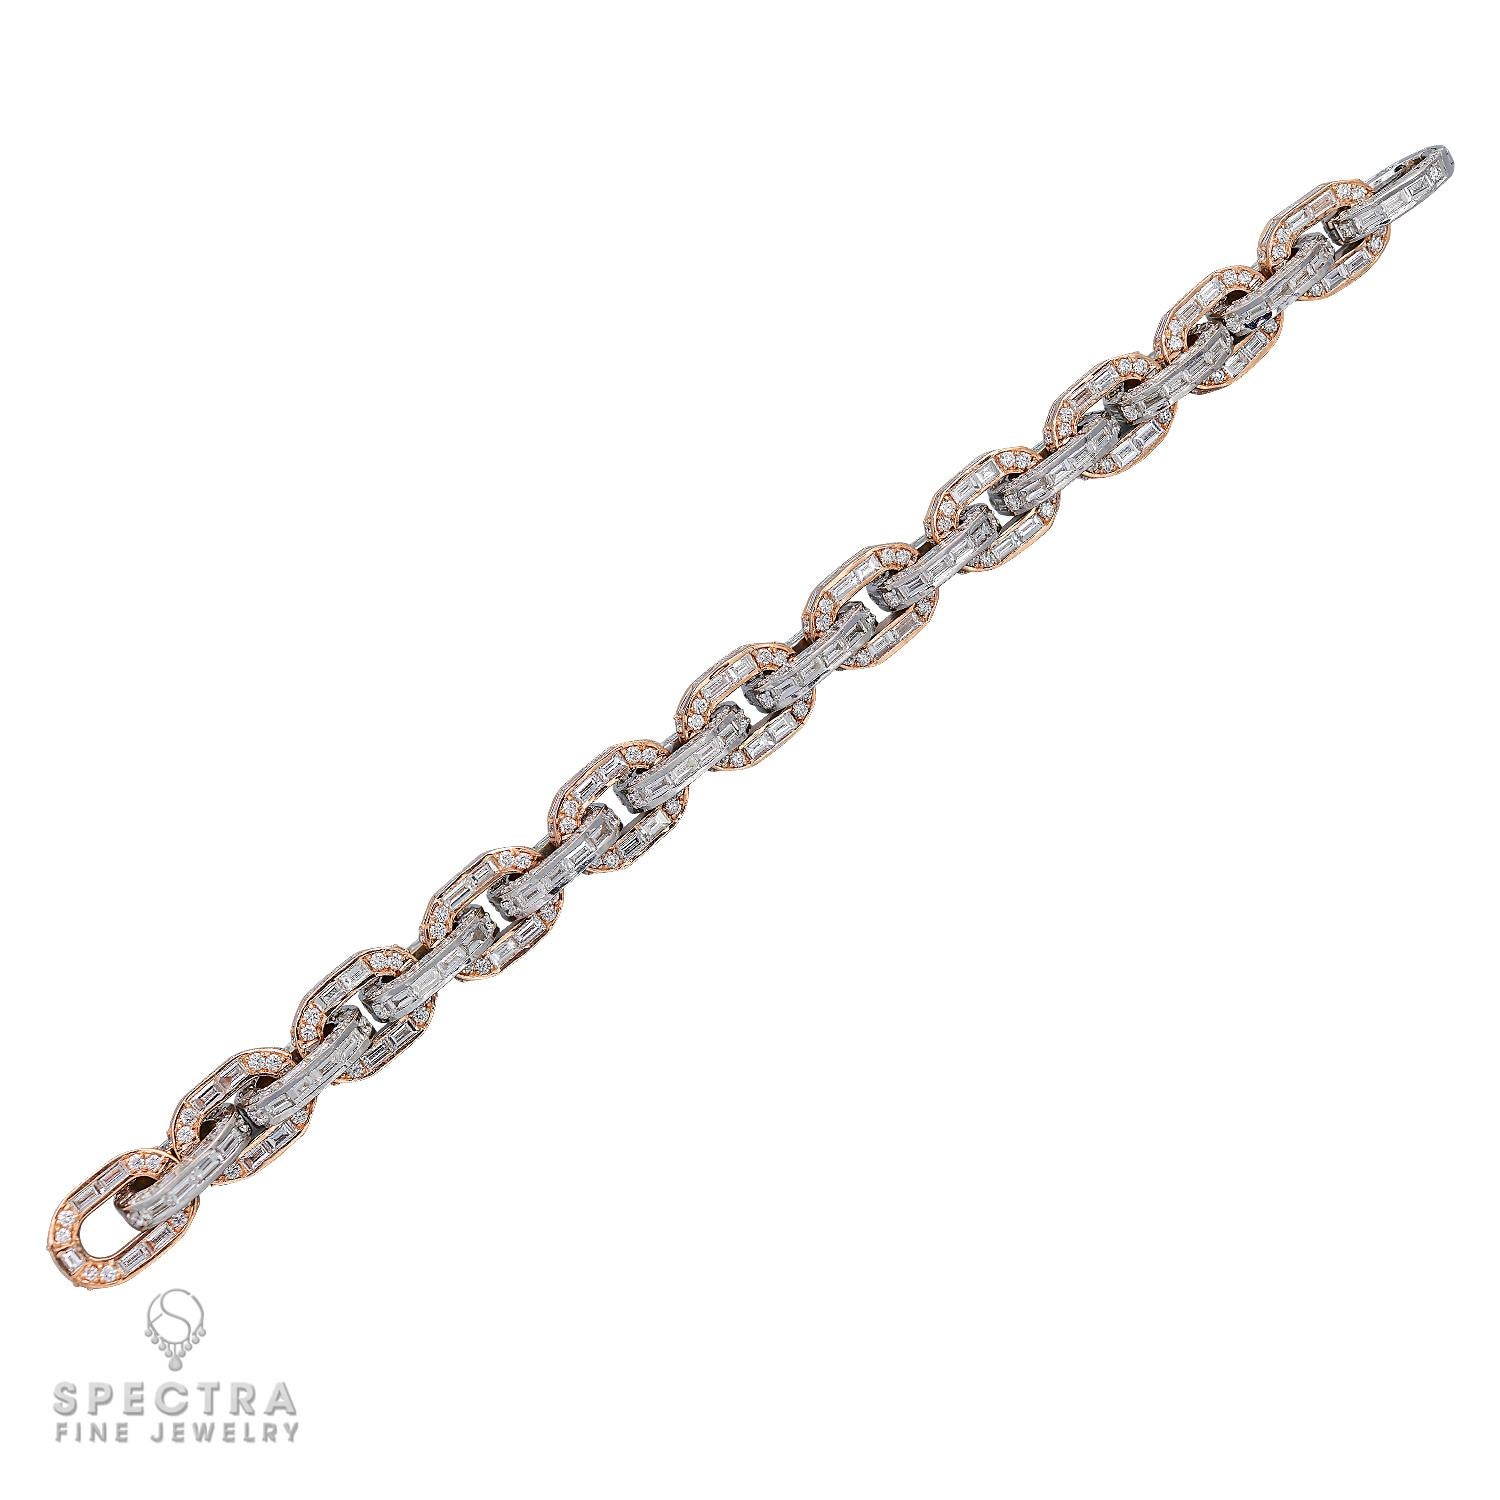 Spectra Fine Jewelry Contemporary Diamond 18k Gold Link Bracelet In New Condition For Sale In New York, NY